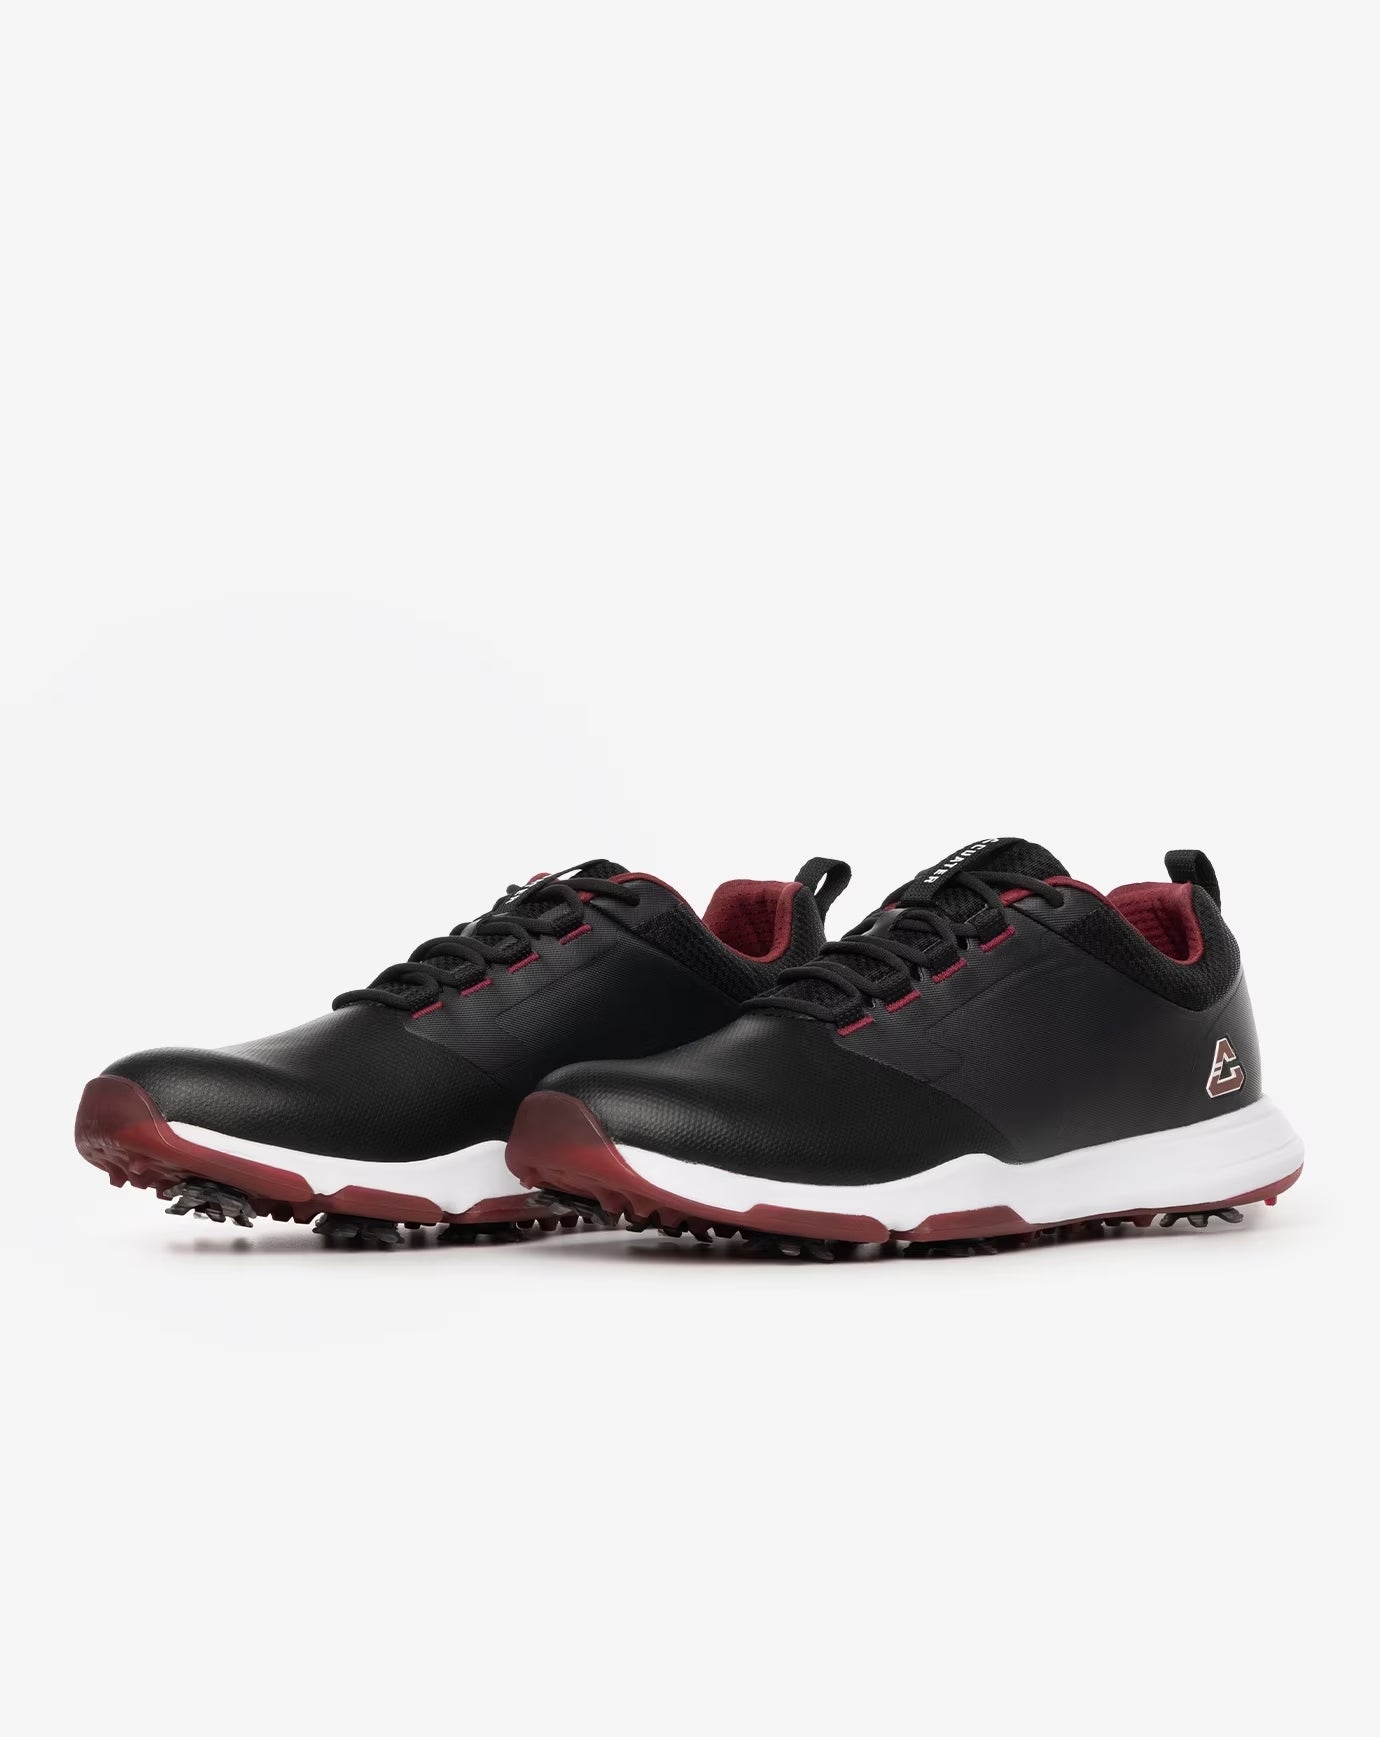 [CUATER] THE RINGER BLACK/RUBY WINE Kuwaiter The Ringer Black/Ruby Wine